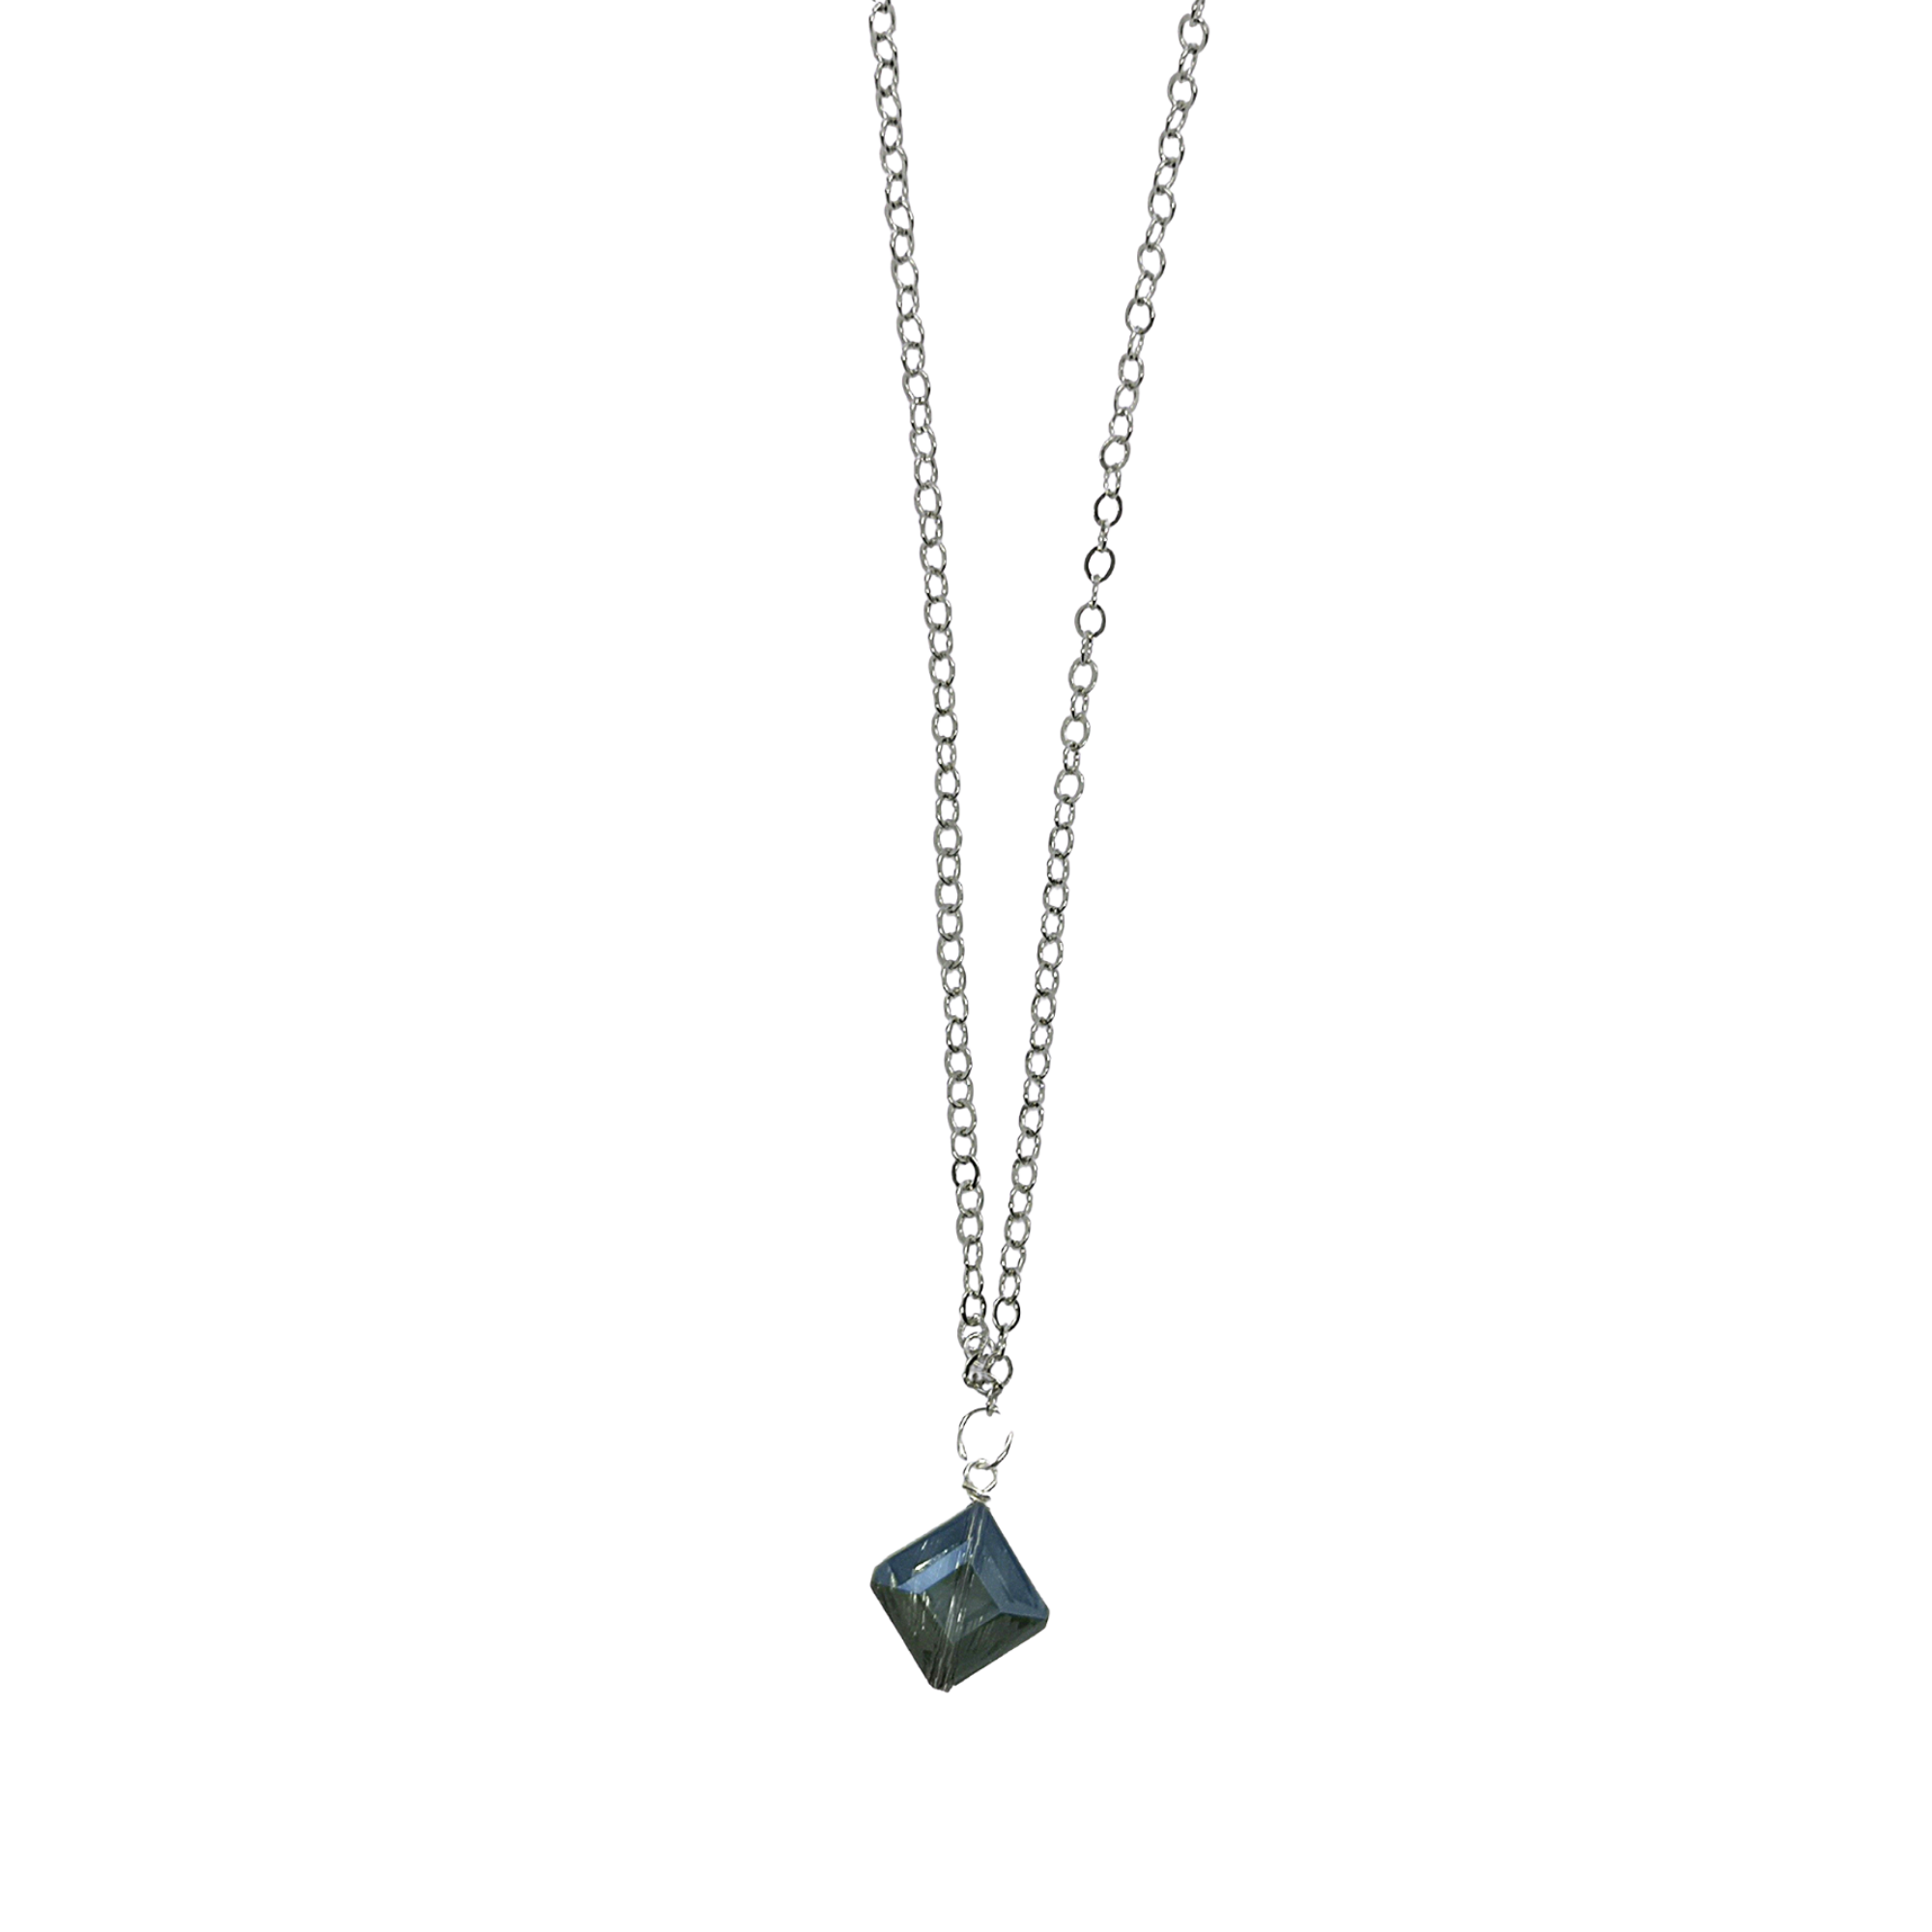 The Prism Collection Necklace